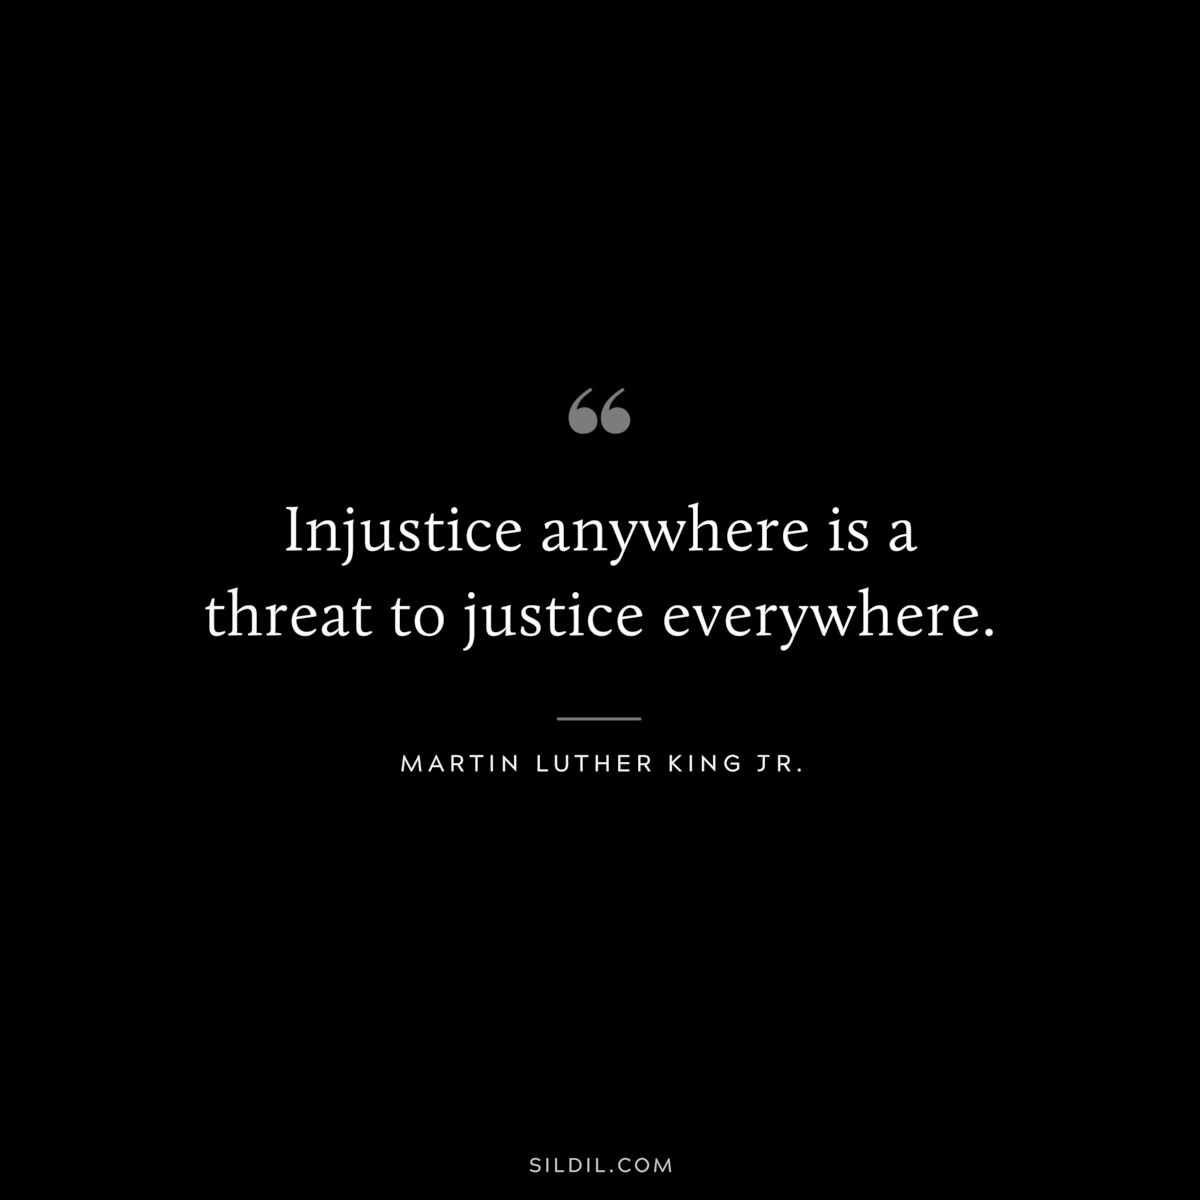 Injustice anywhere is a threat to justice everywhere. ― Martin Luther King Jr.